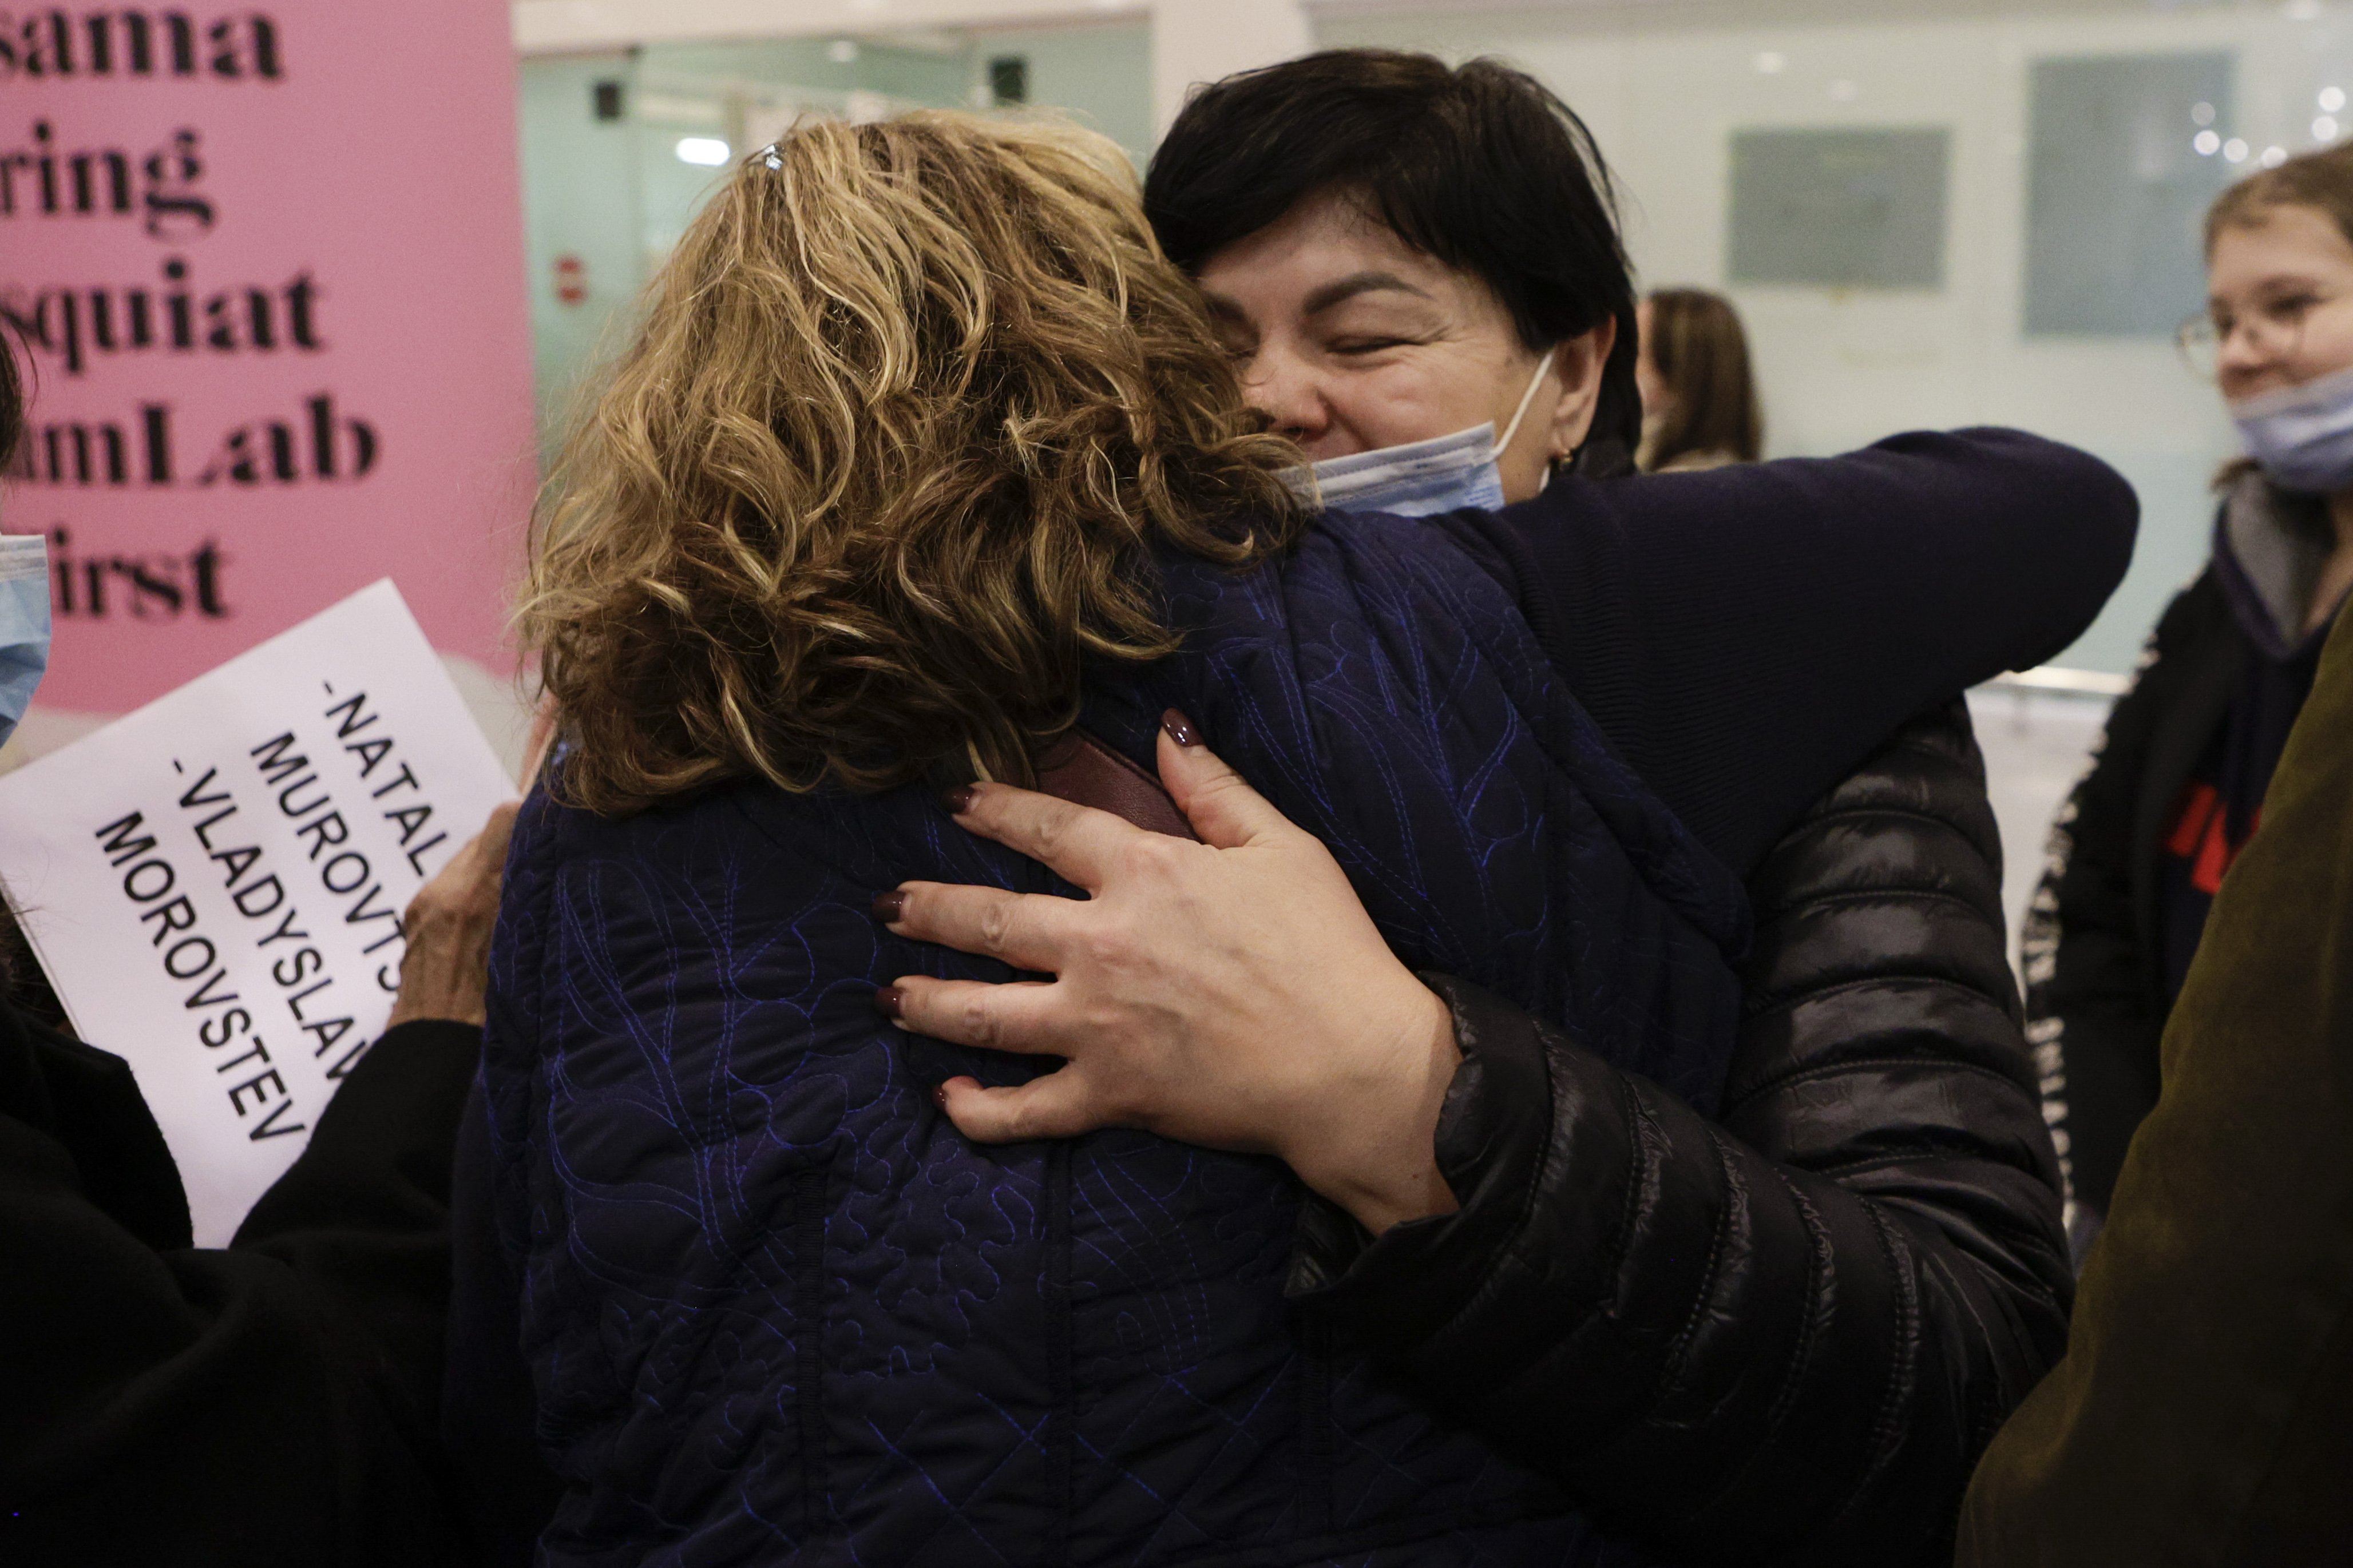 Reception centres for Ukrainian refugees to open in Barcelona, Madrid and Alicante